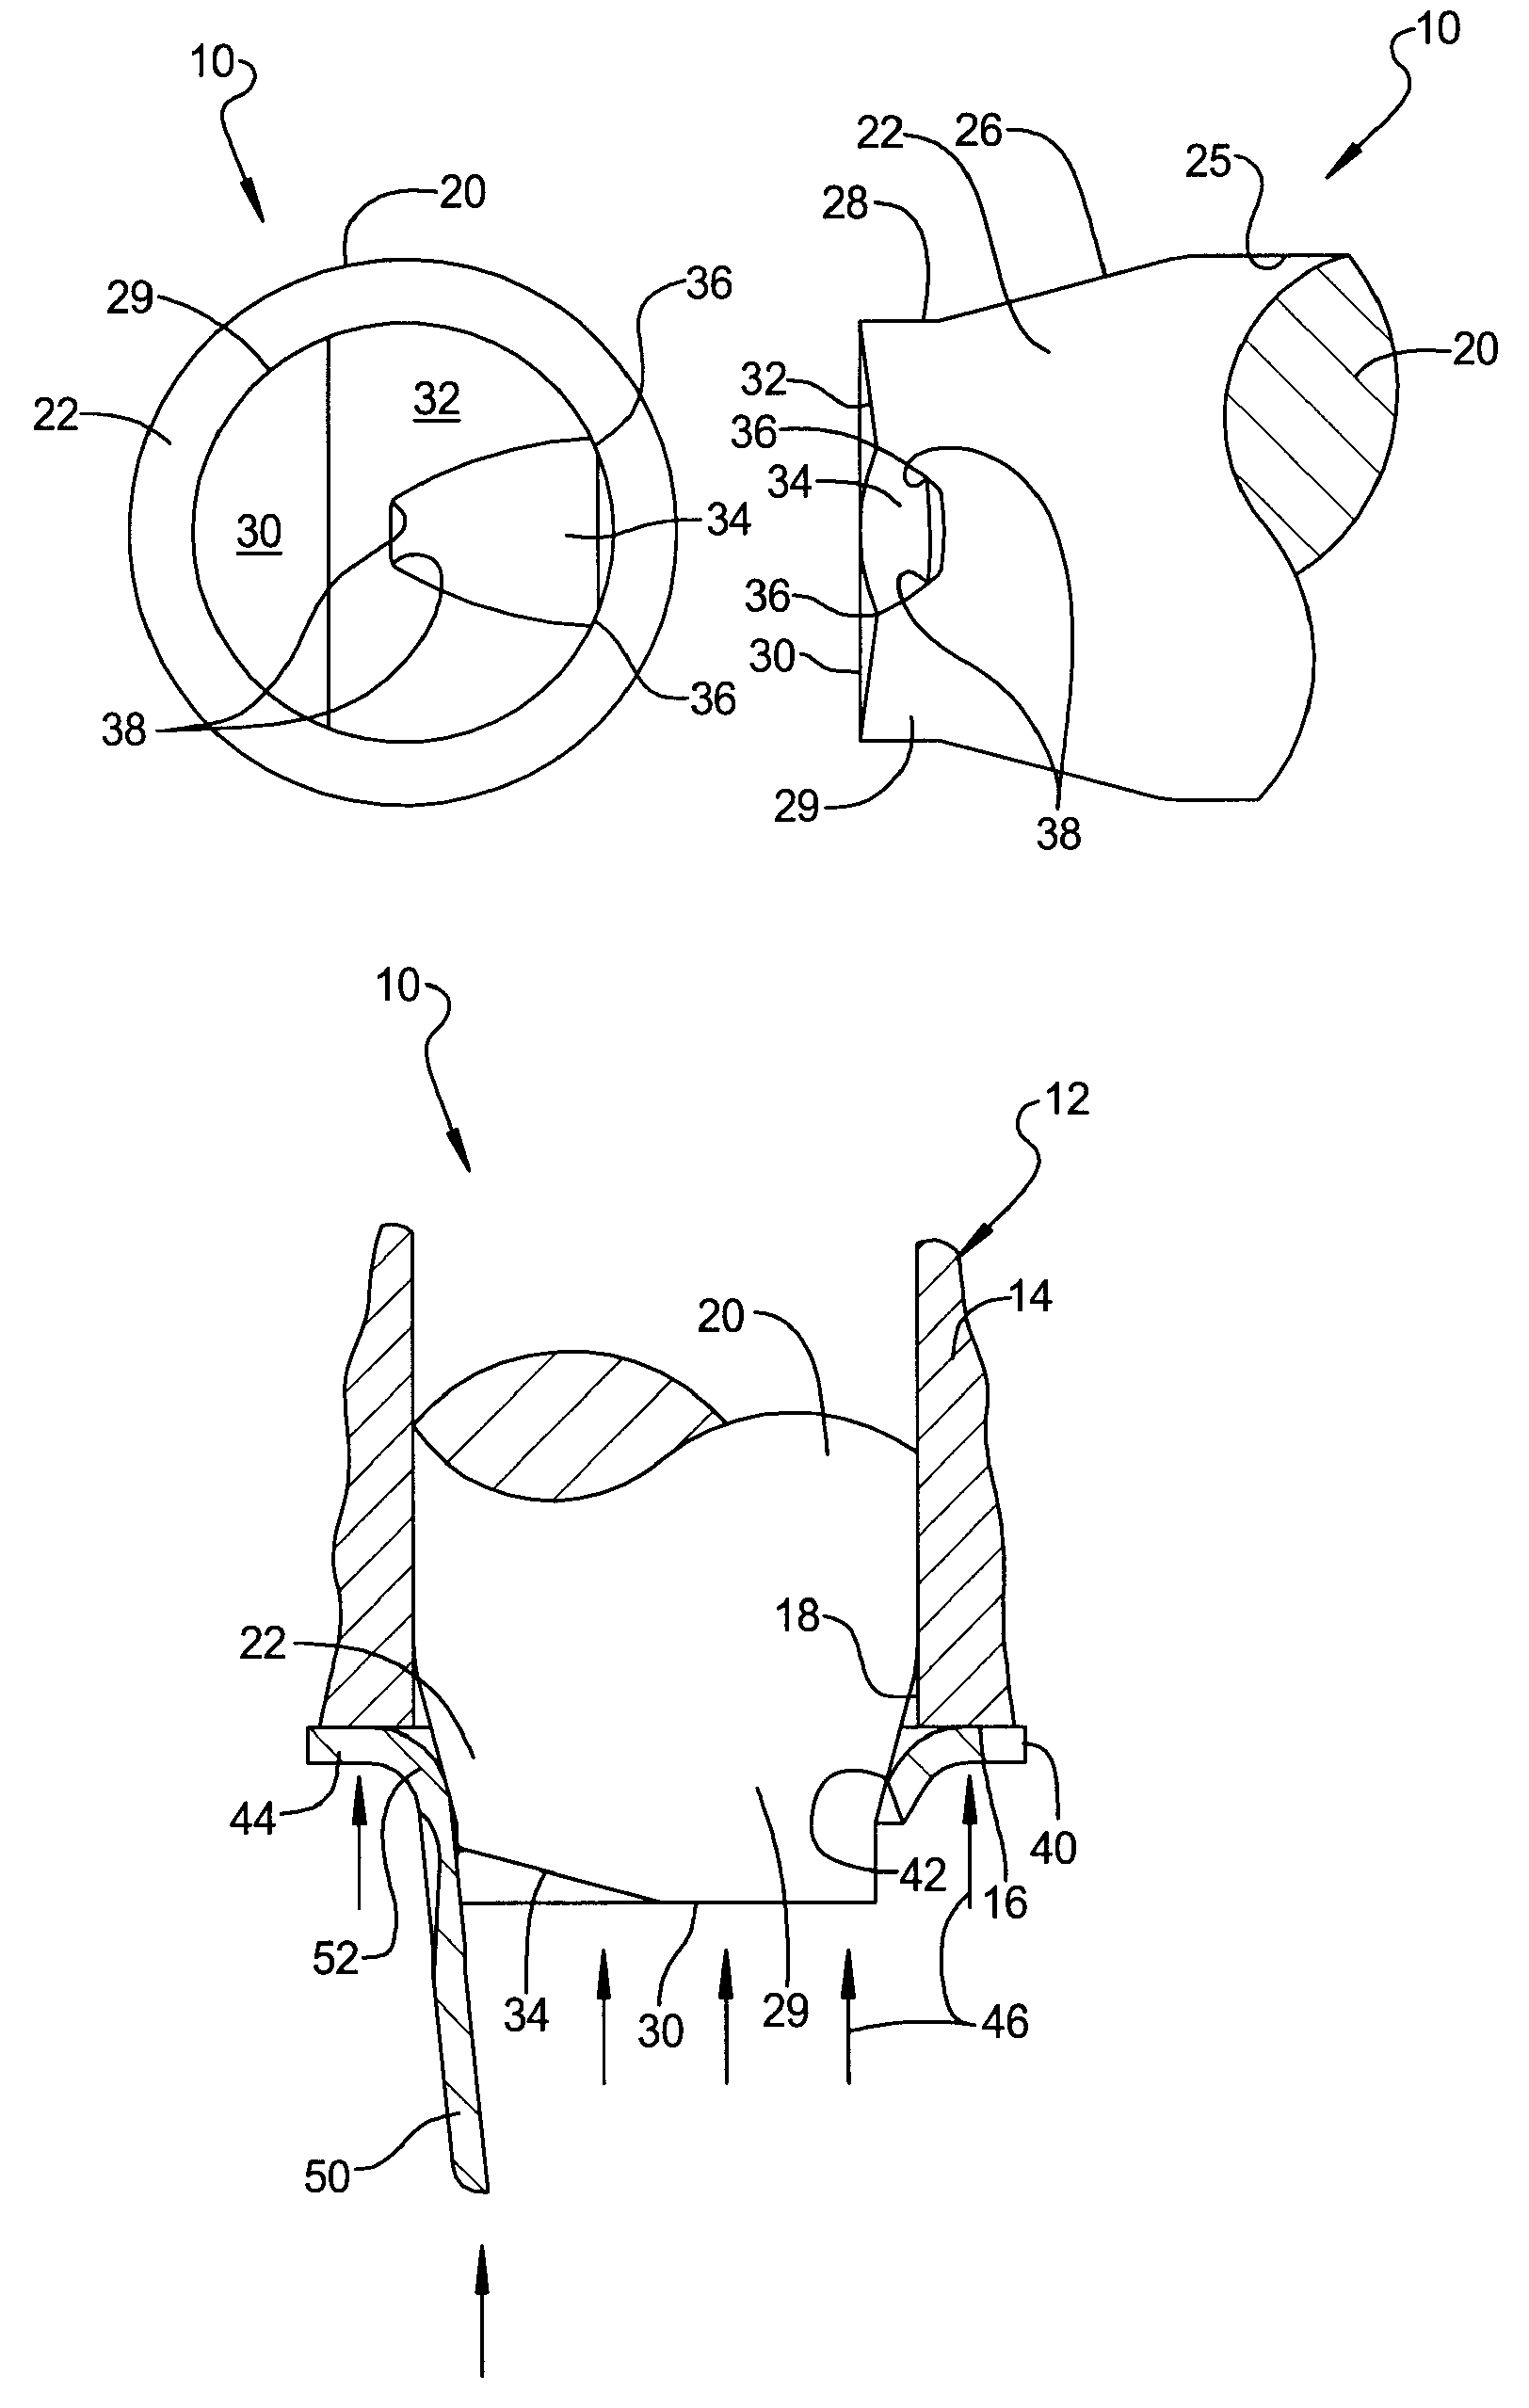 Punch for hydroforming die